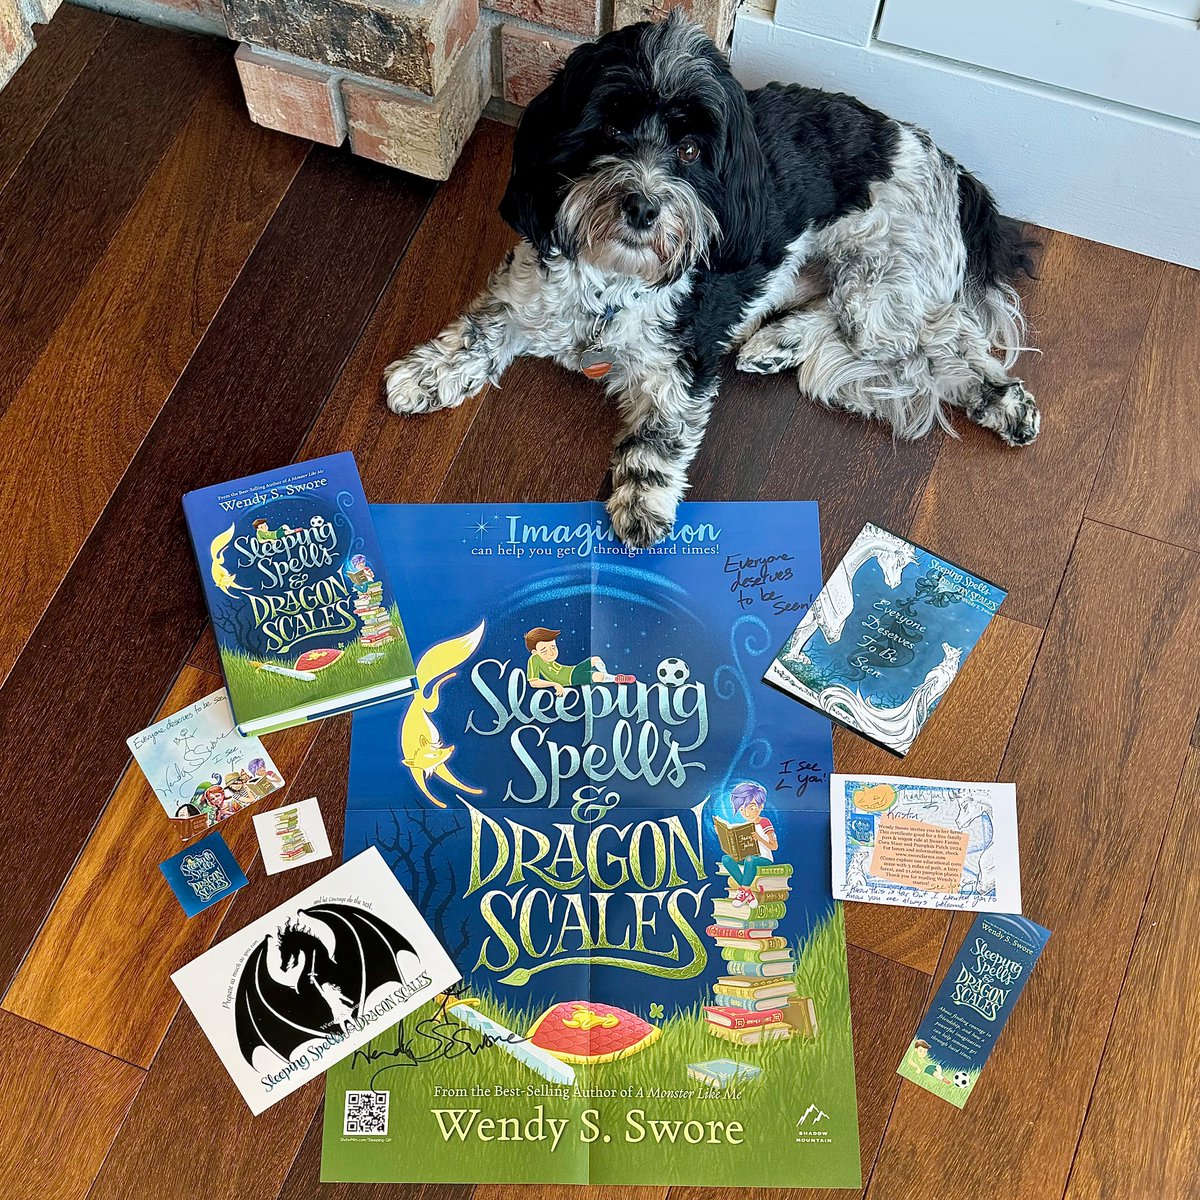 Happy book birthday to @WendySwore’s newest novel, Sleeping Spells and Dragon Scales! 💙📚🐉⚽️💙 Get your copy today! Swipe to see Watson inserting himself into my book and swag photo shoot. 😂